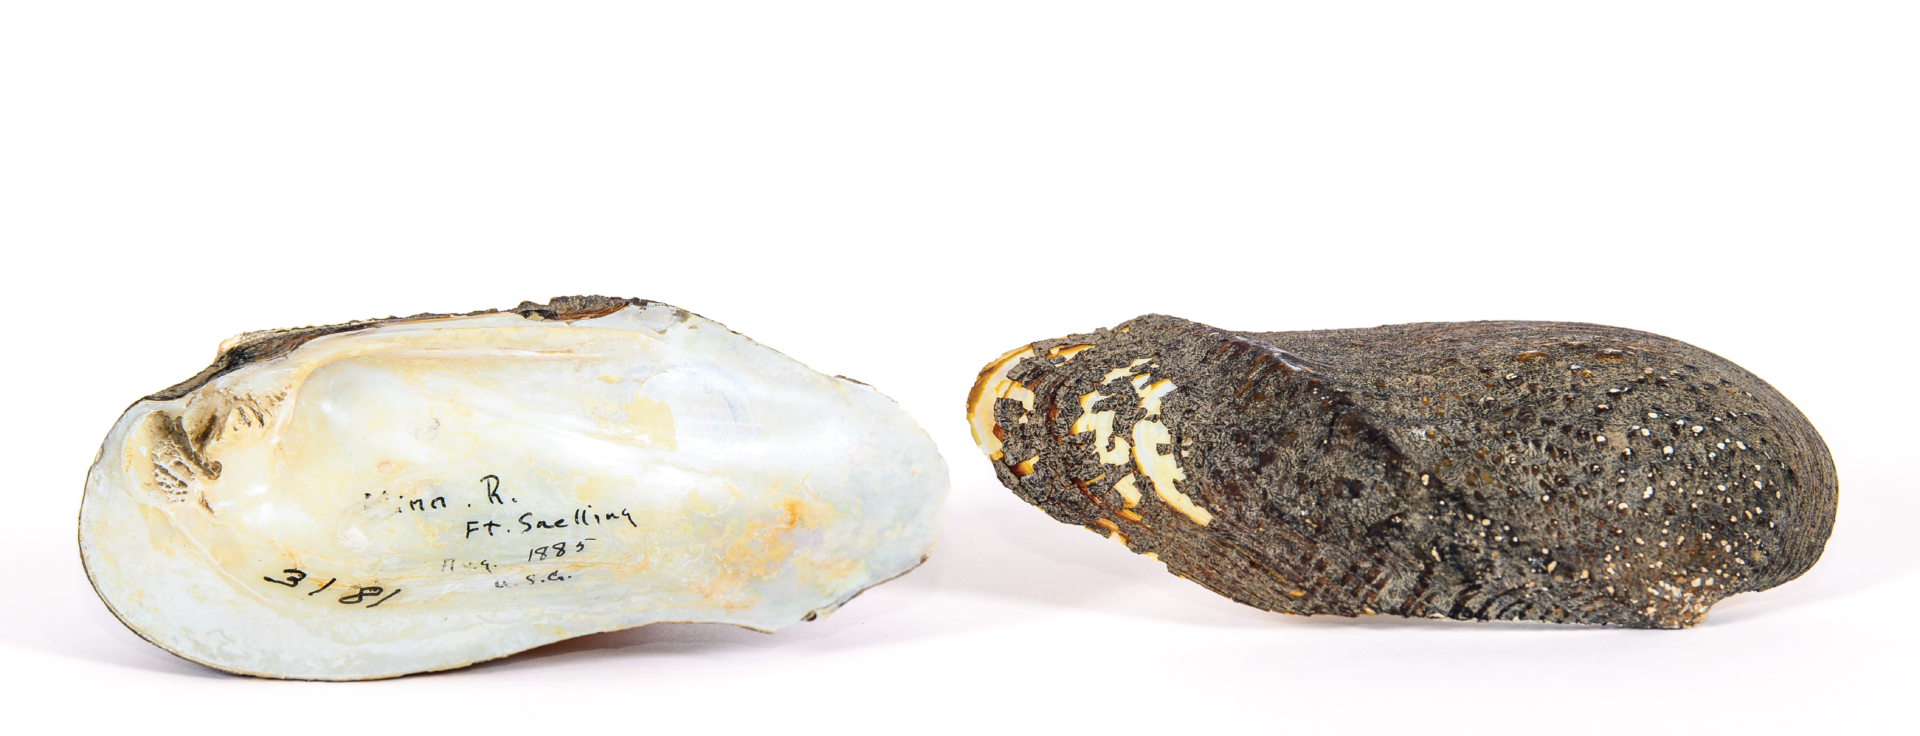 The front and back of a mollusk with a small inscription